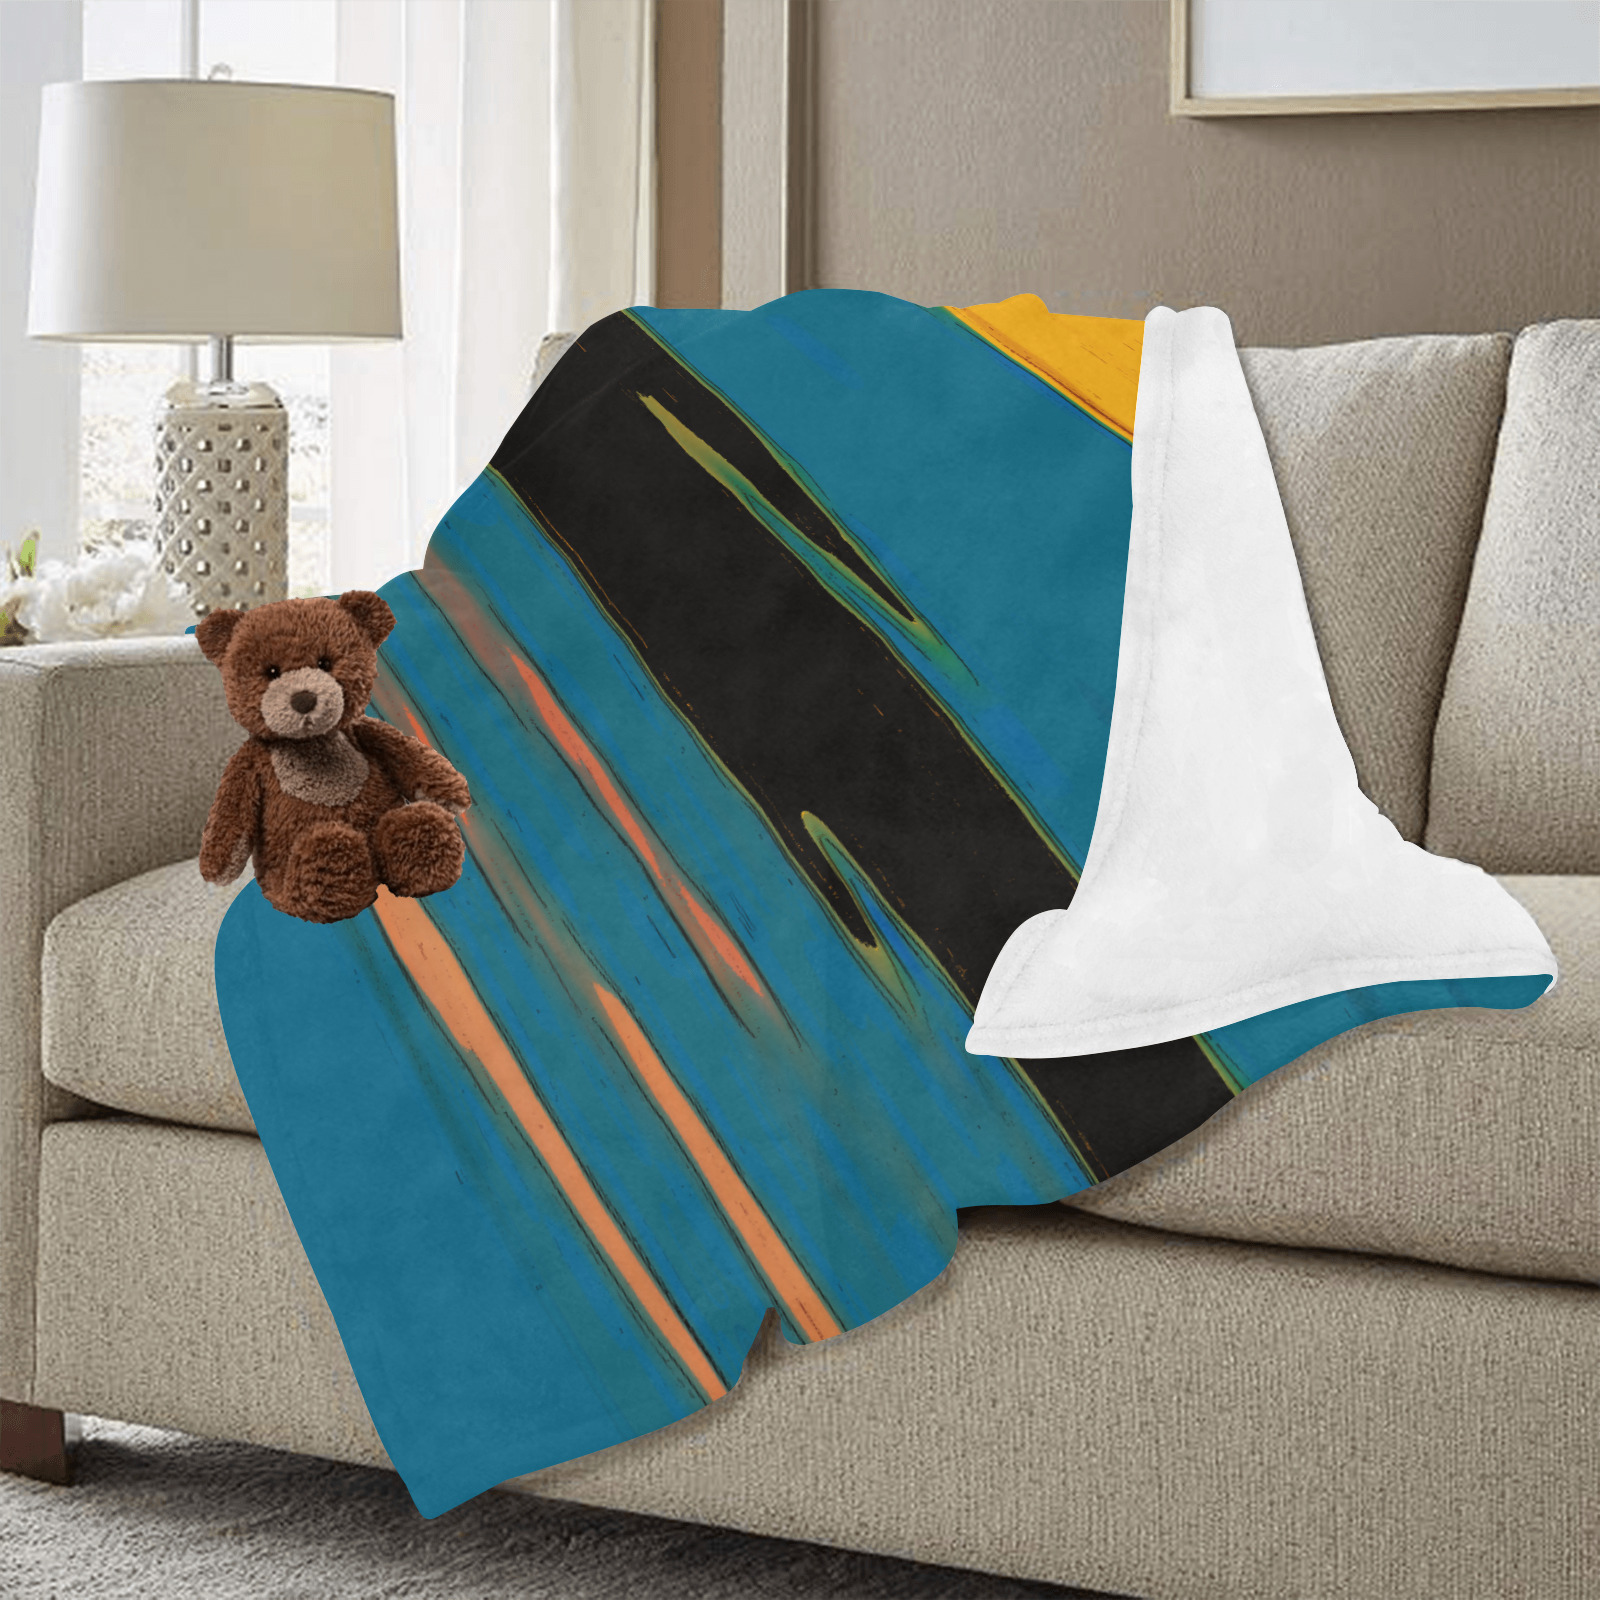 Black Turquoise And Orange Go! Abstract Art Ultra-Soft Micro Fleece Blanket 60"x80" (Thick)